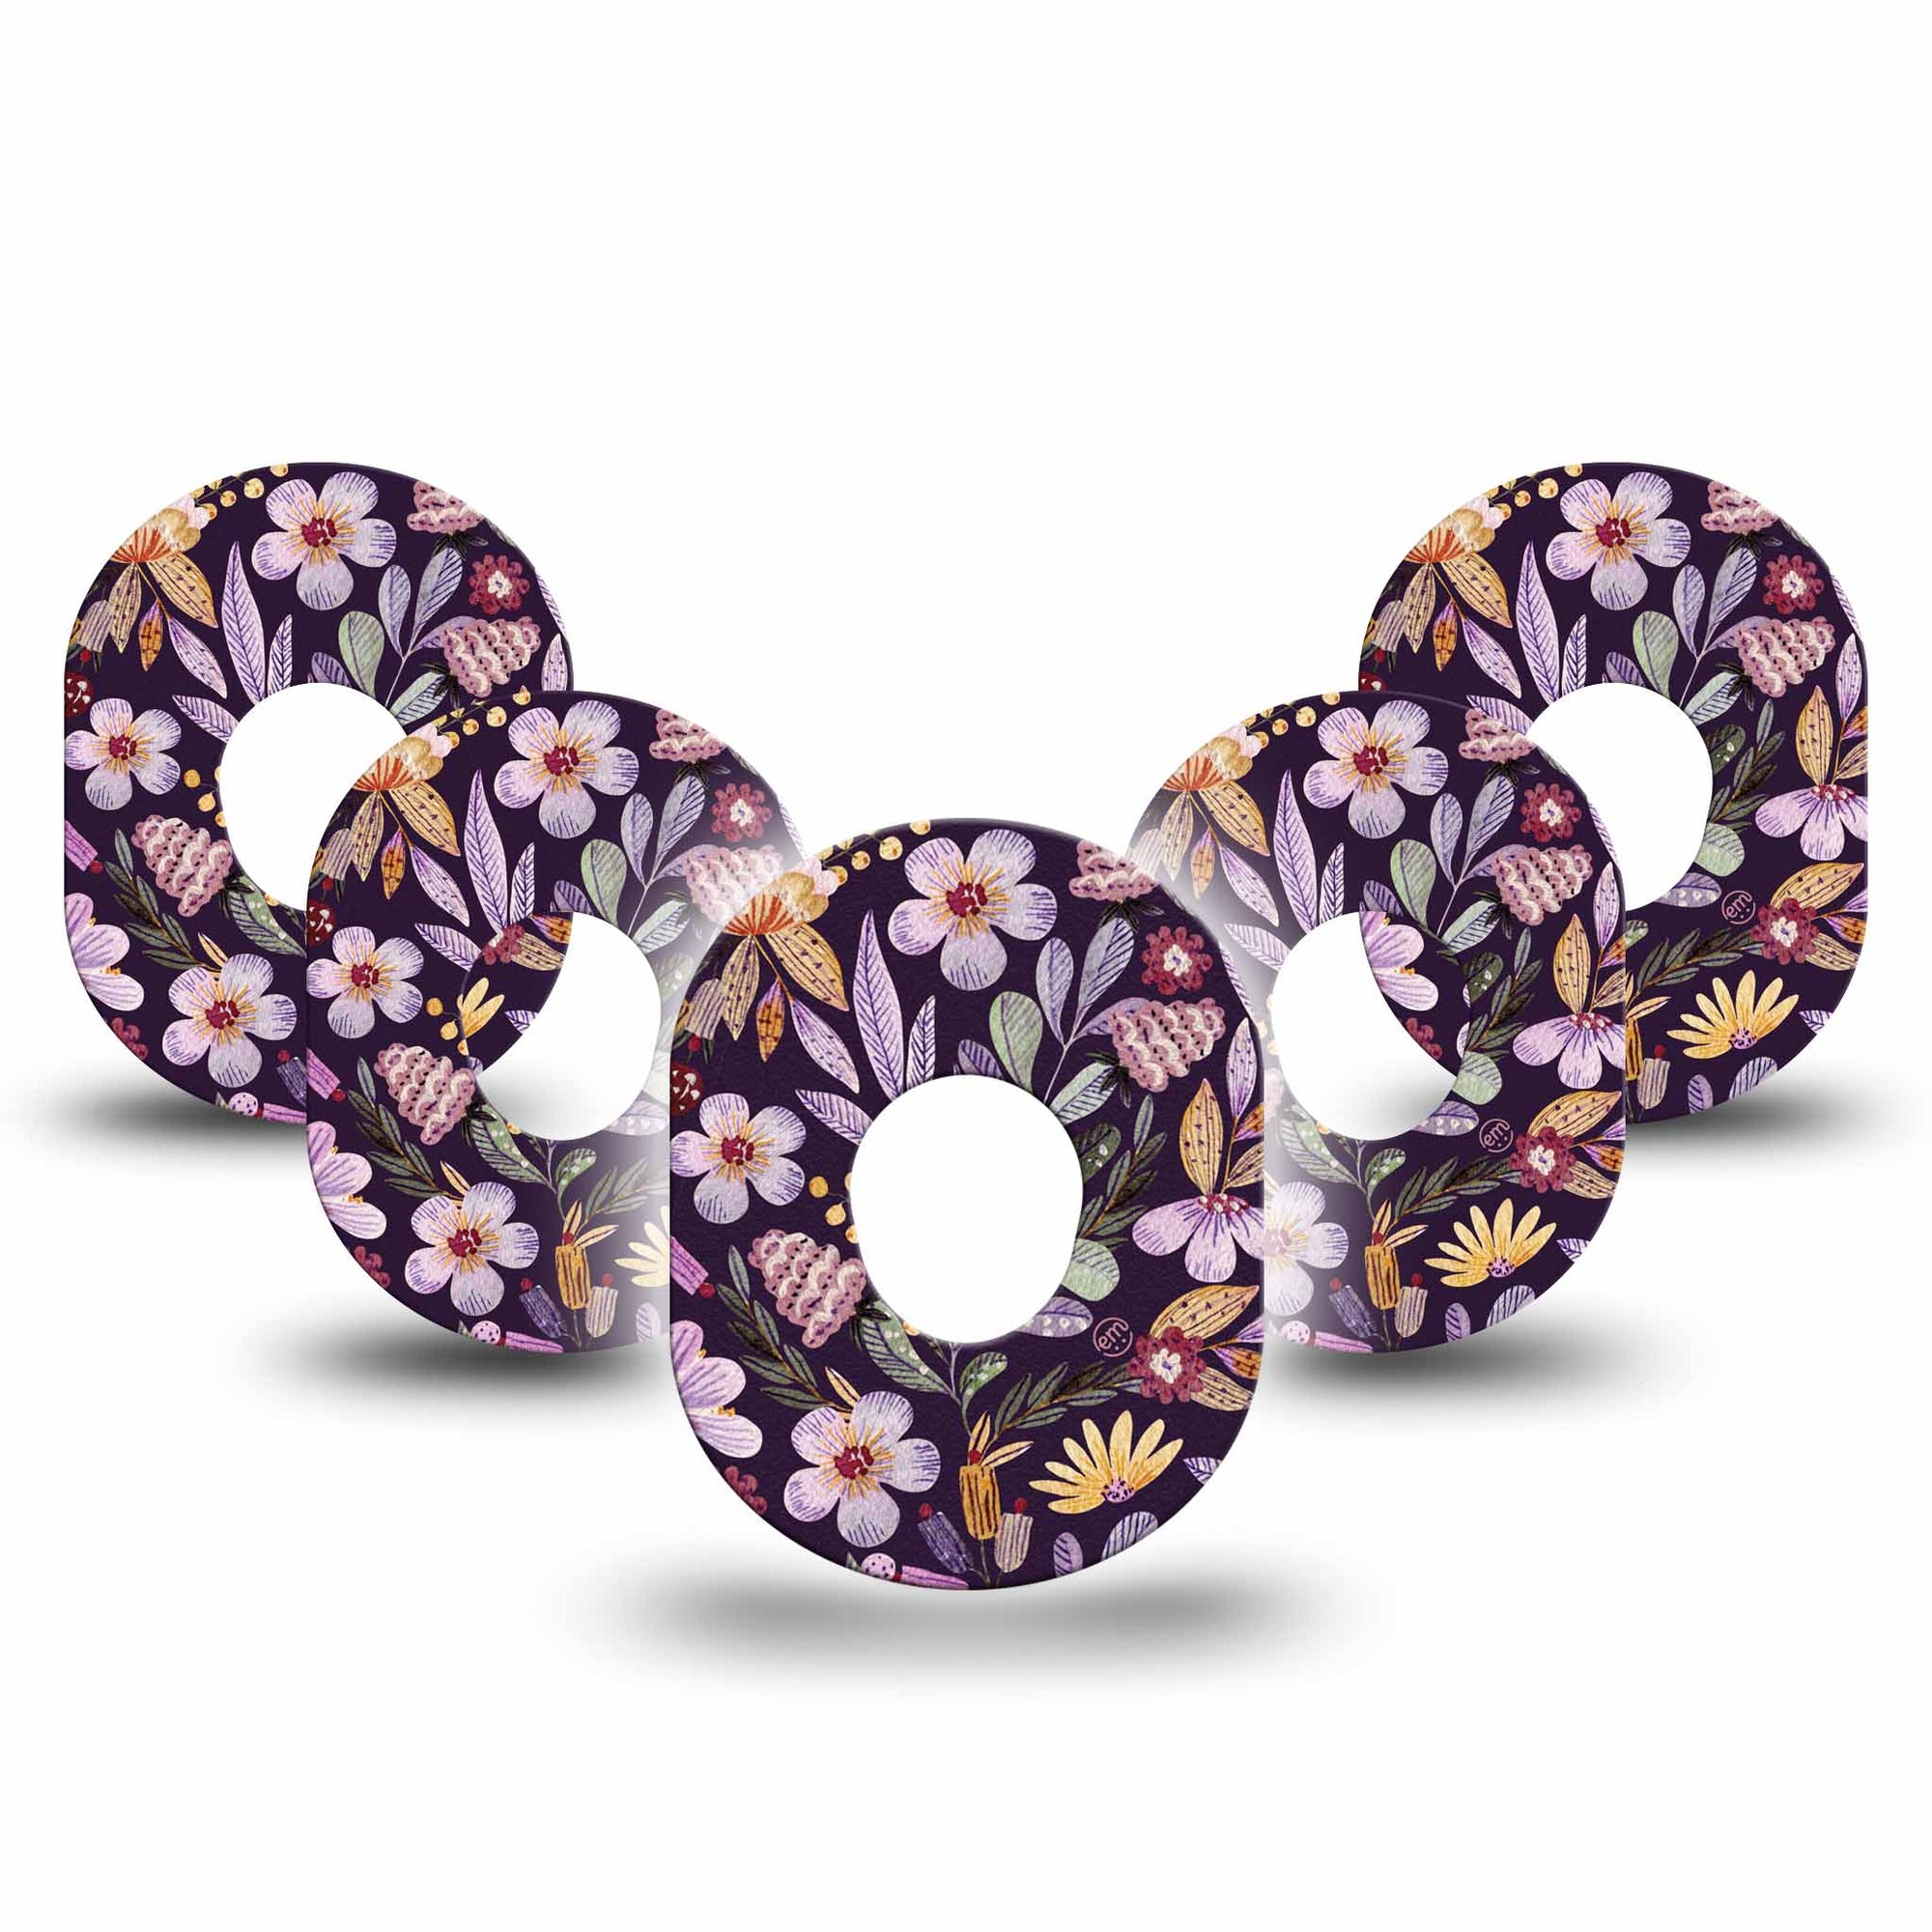 ExpressionMed Moody Blooms Dexcom G7 Tape, 5-Pack, Muted Colored Florals over Dark backdrop, CGM Adhesive Patch Design, Dexcom Stelo Glucose Biosensor System